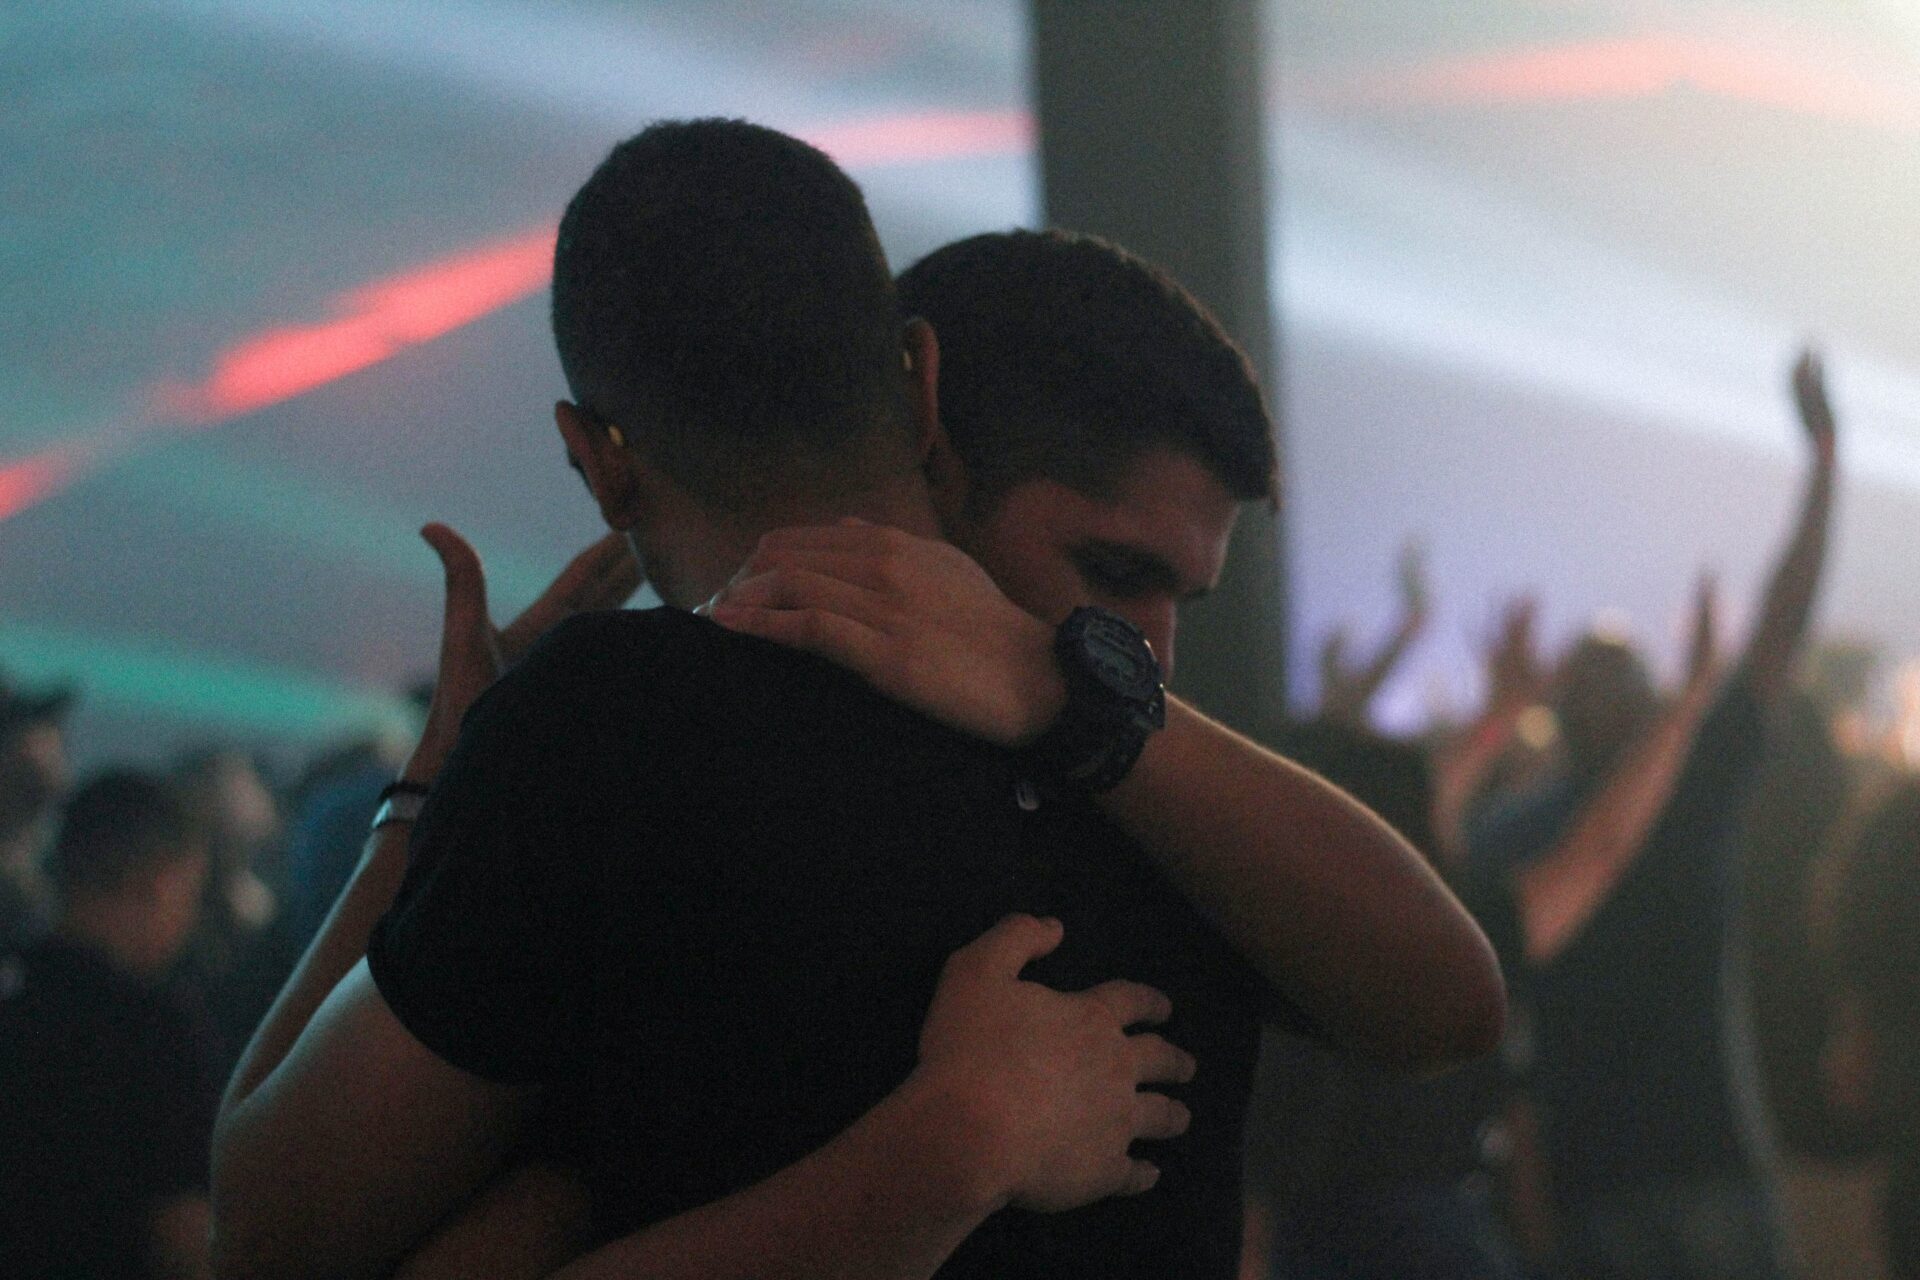 two men embracing in the crowd at a concert with confetti falling around them